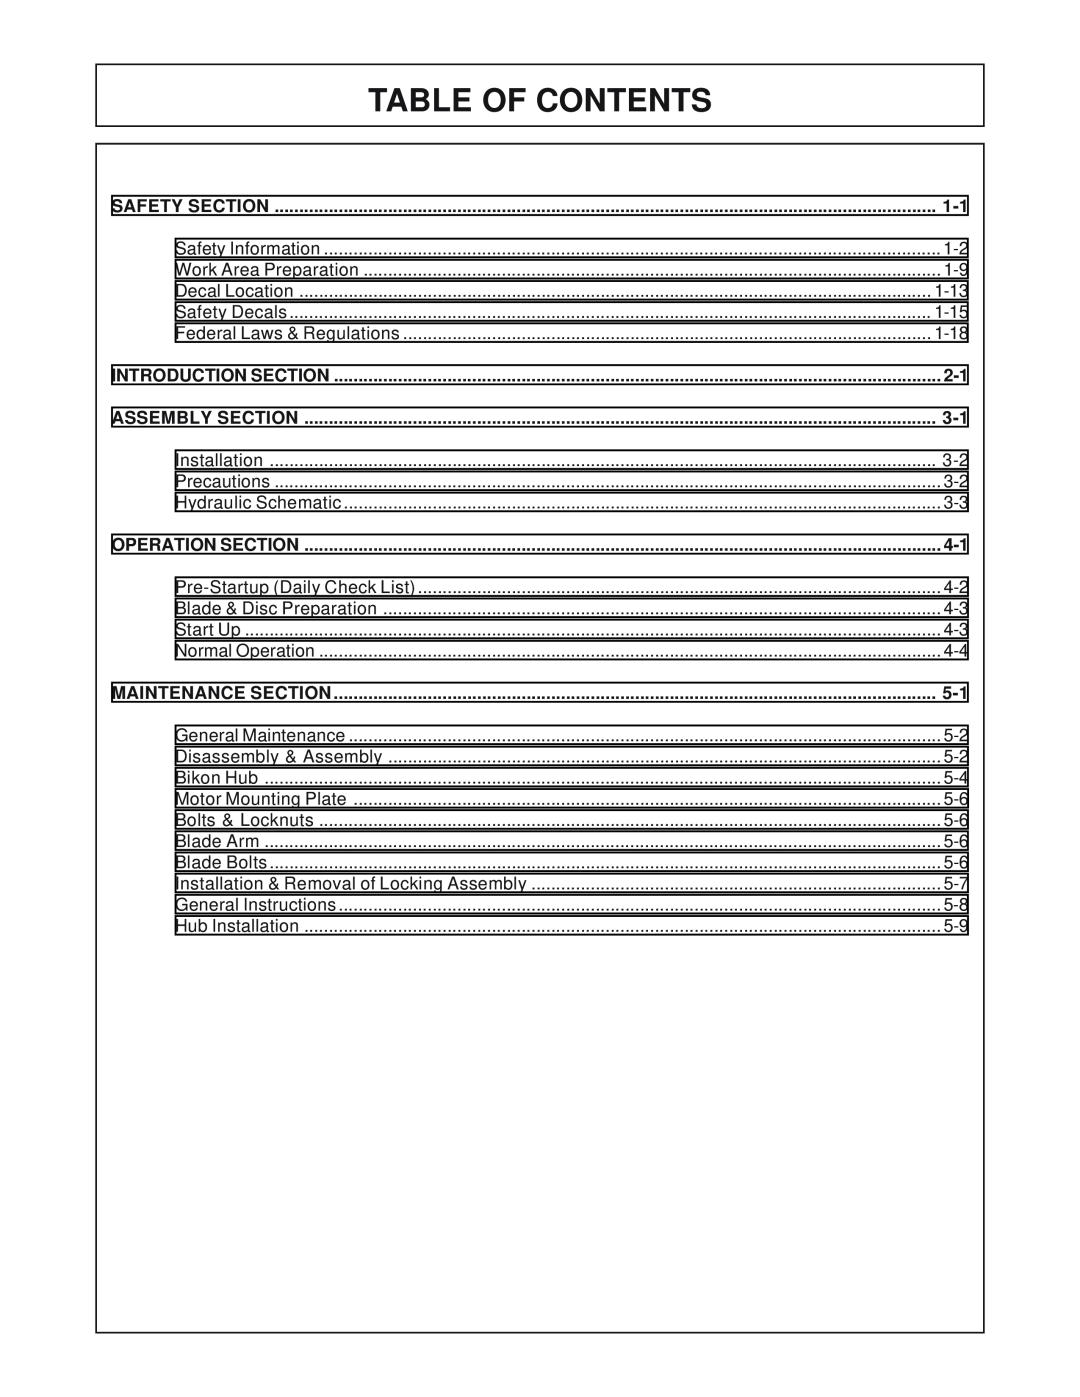 Grizzly 52 manual Table Of Contents, Safety Section, Introduction Section, Assembly Section, Operation Section 